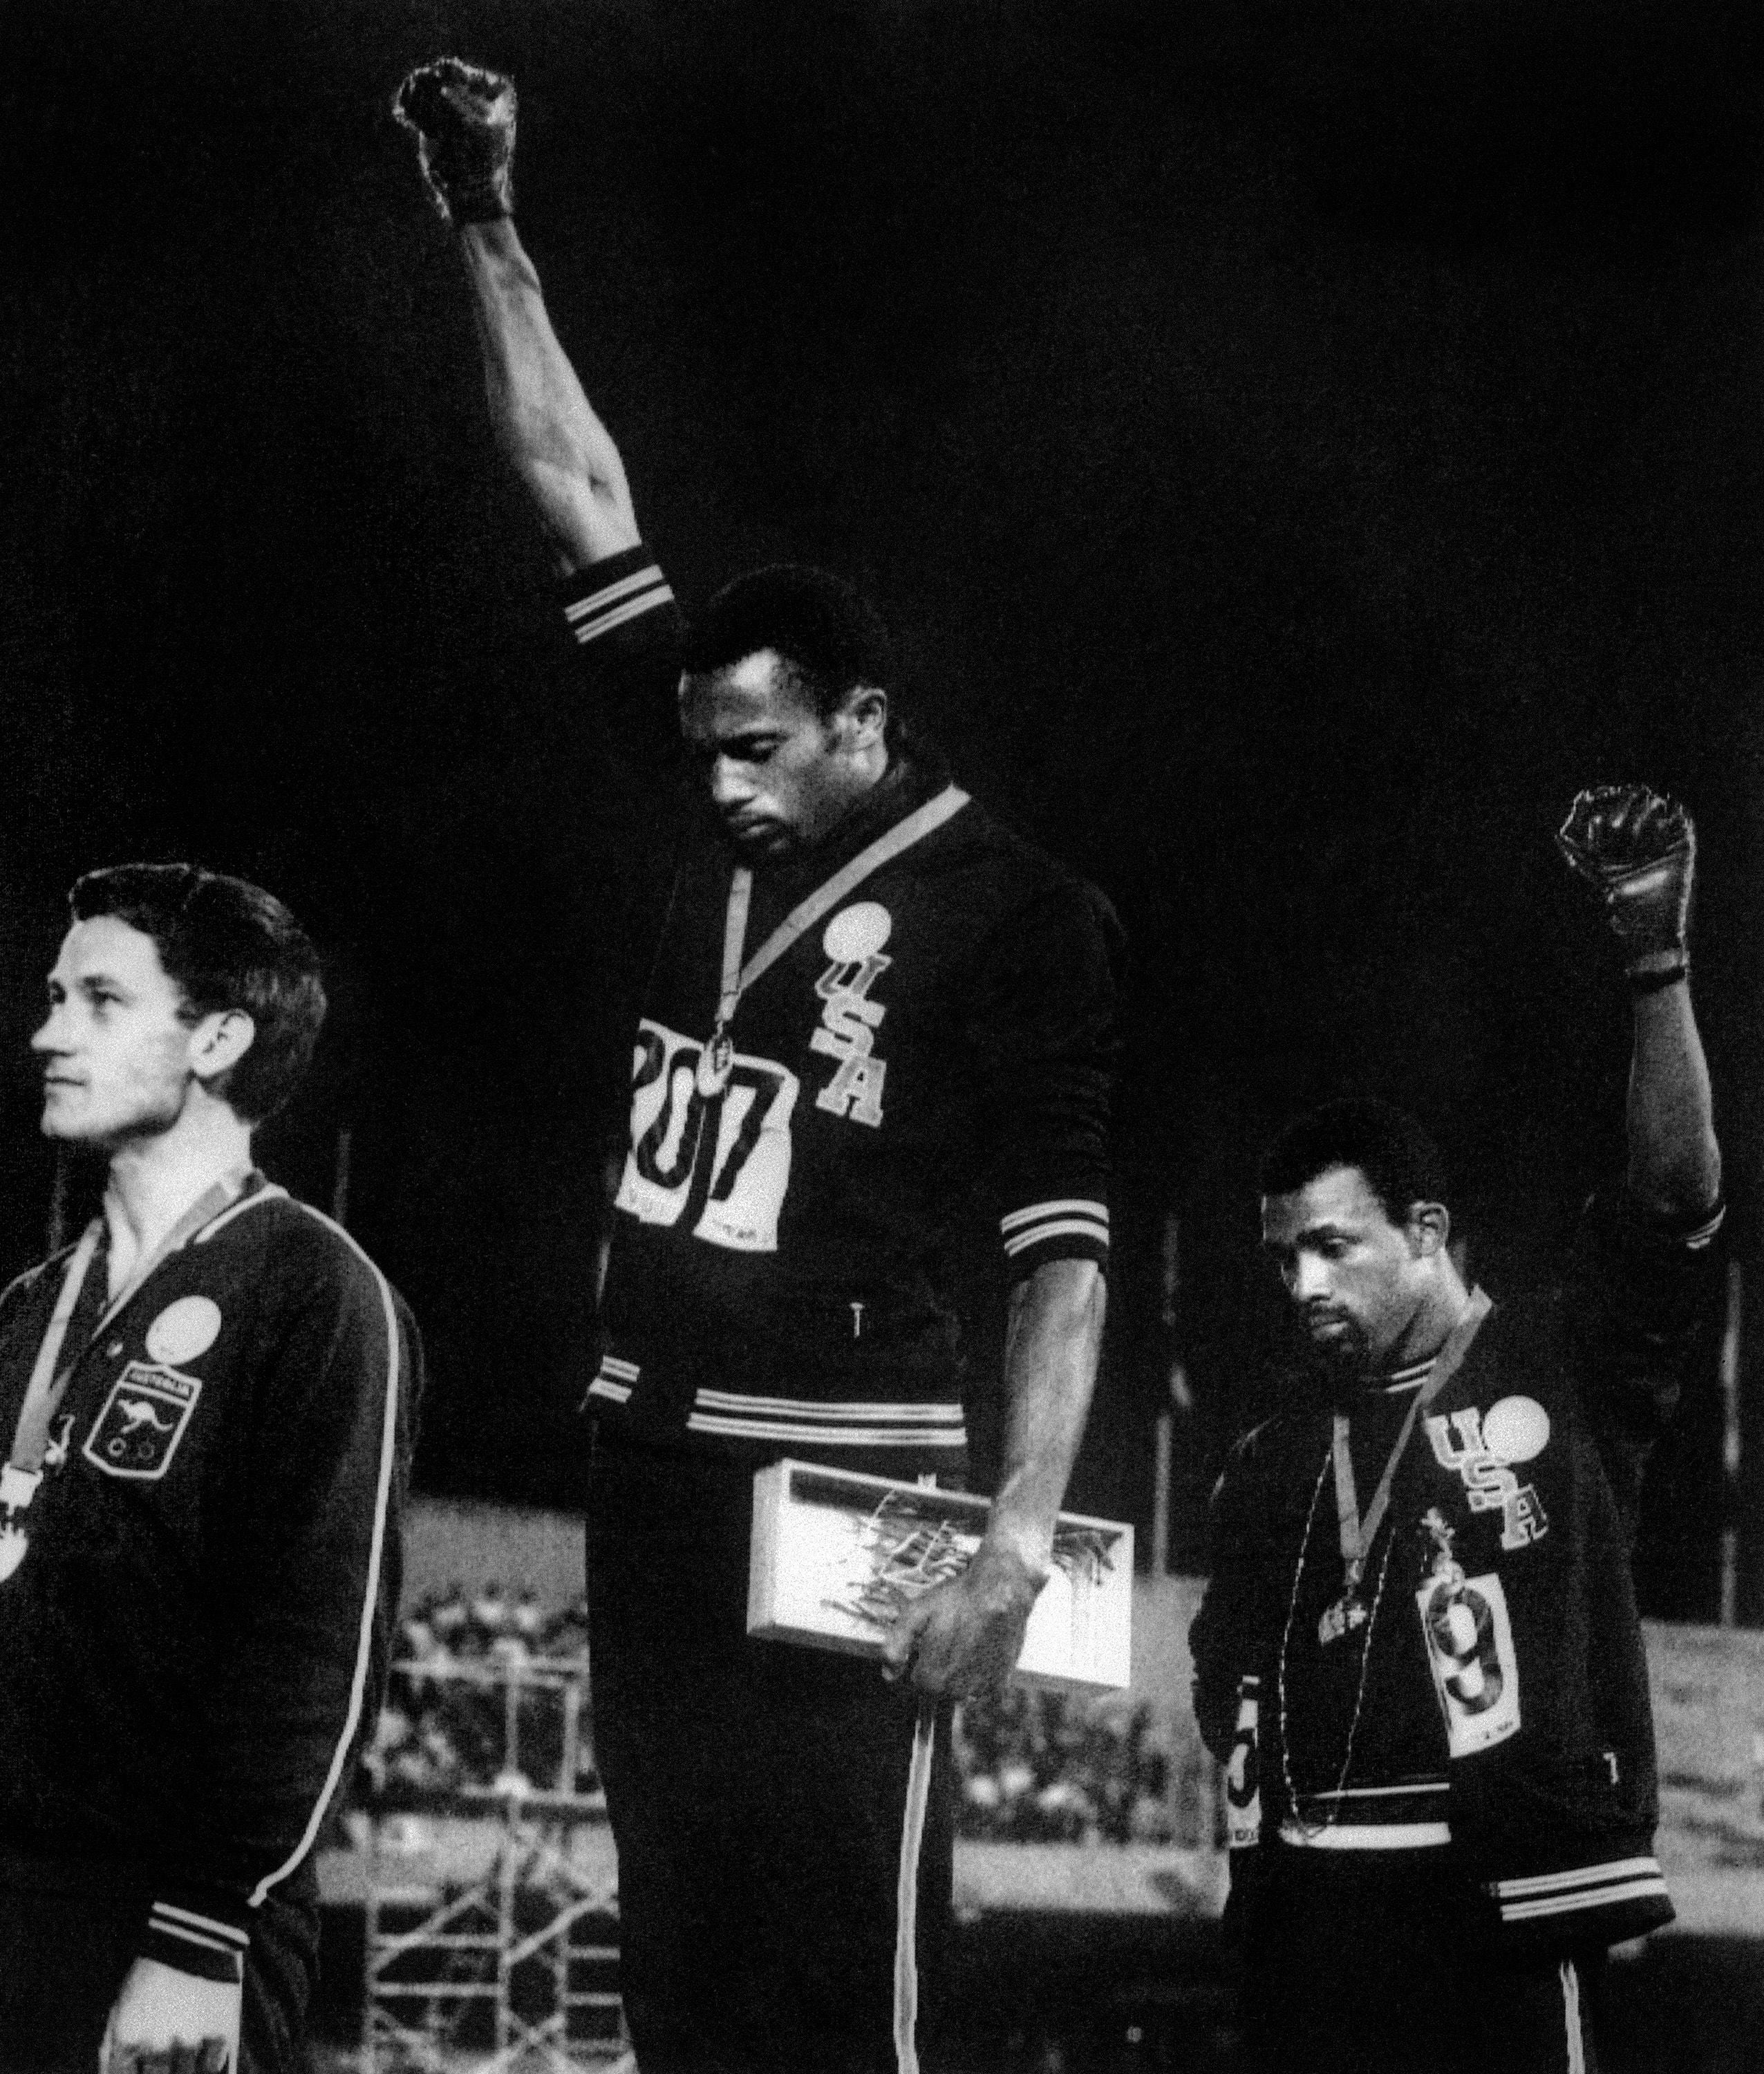 US athletes Tommie Smith (C) and John Carlos (R) raise their gloved fists in the Black Power salute to express their opposition to racism in the USA during the national anthem